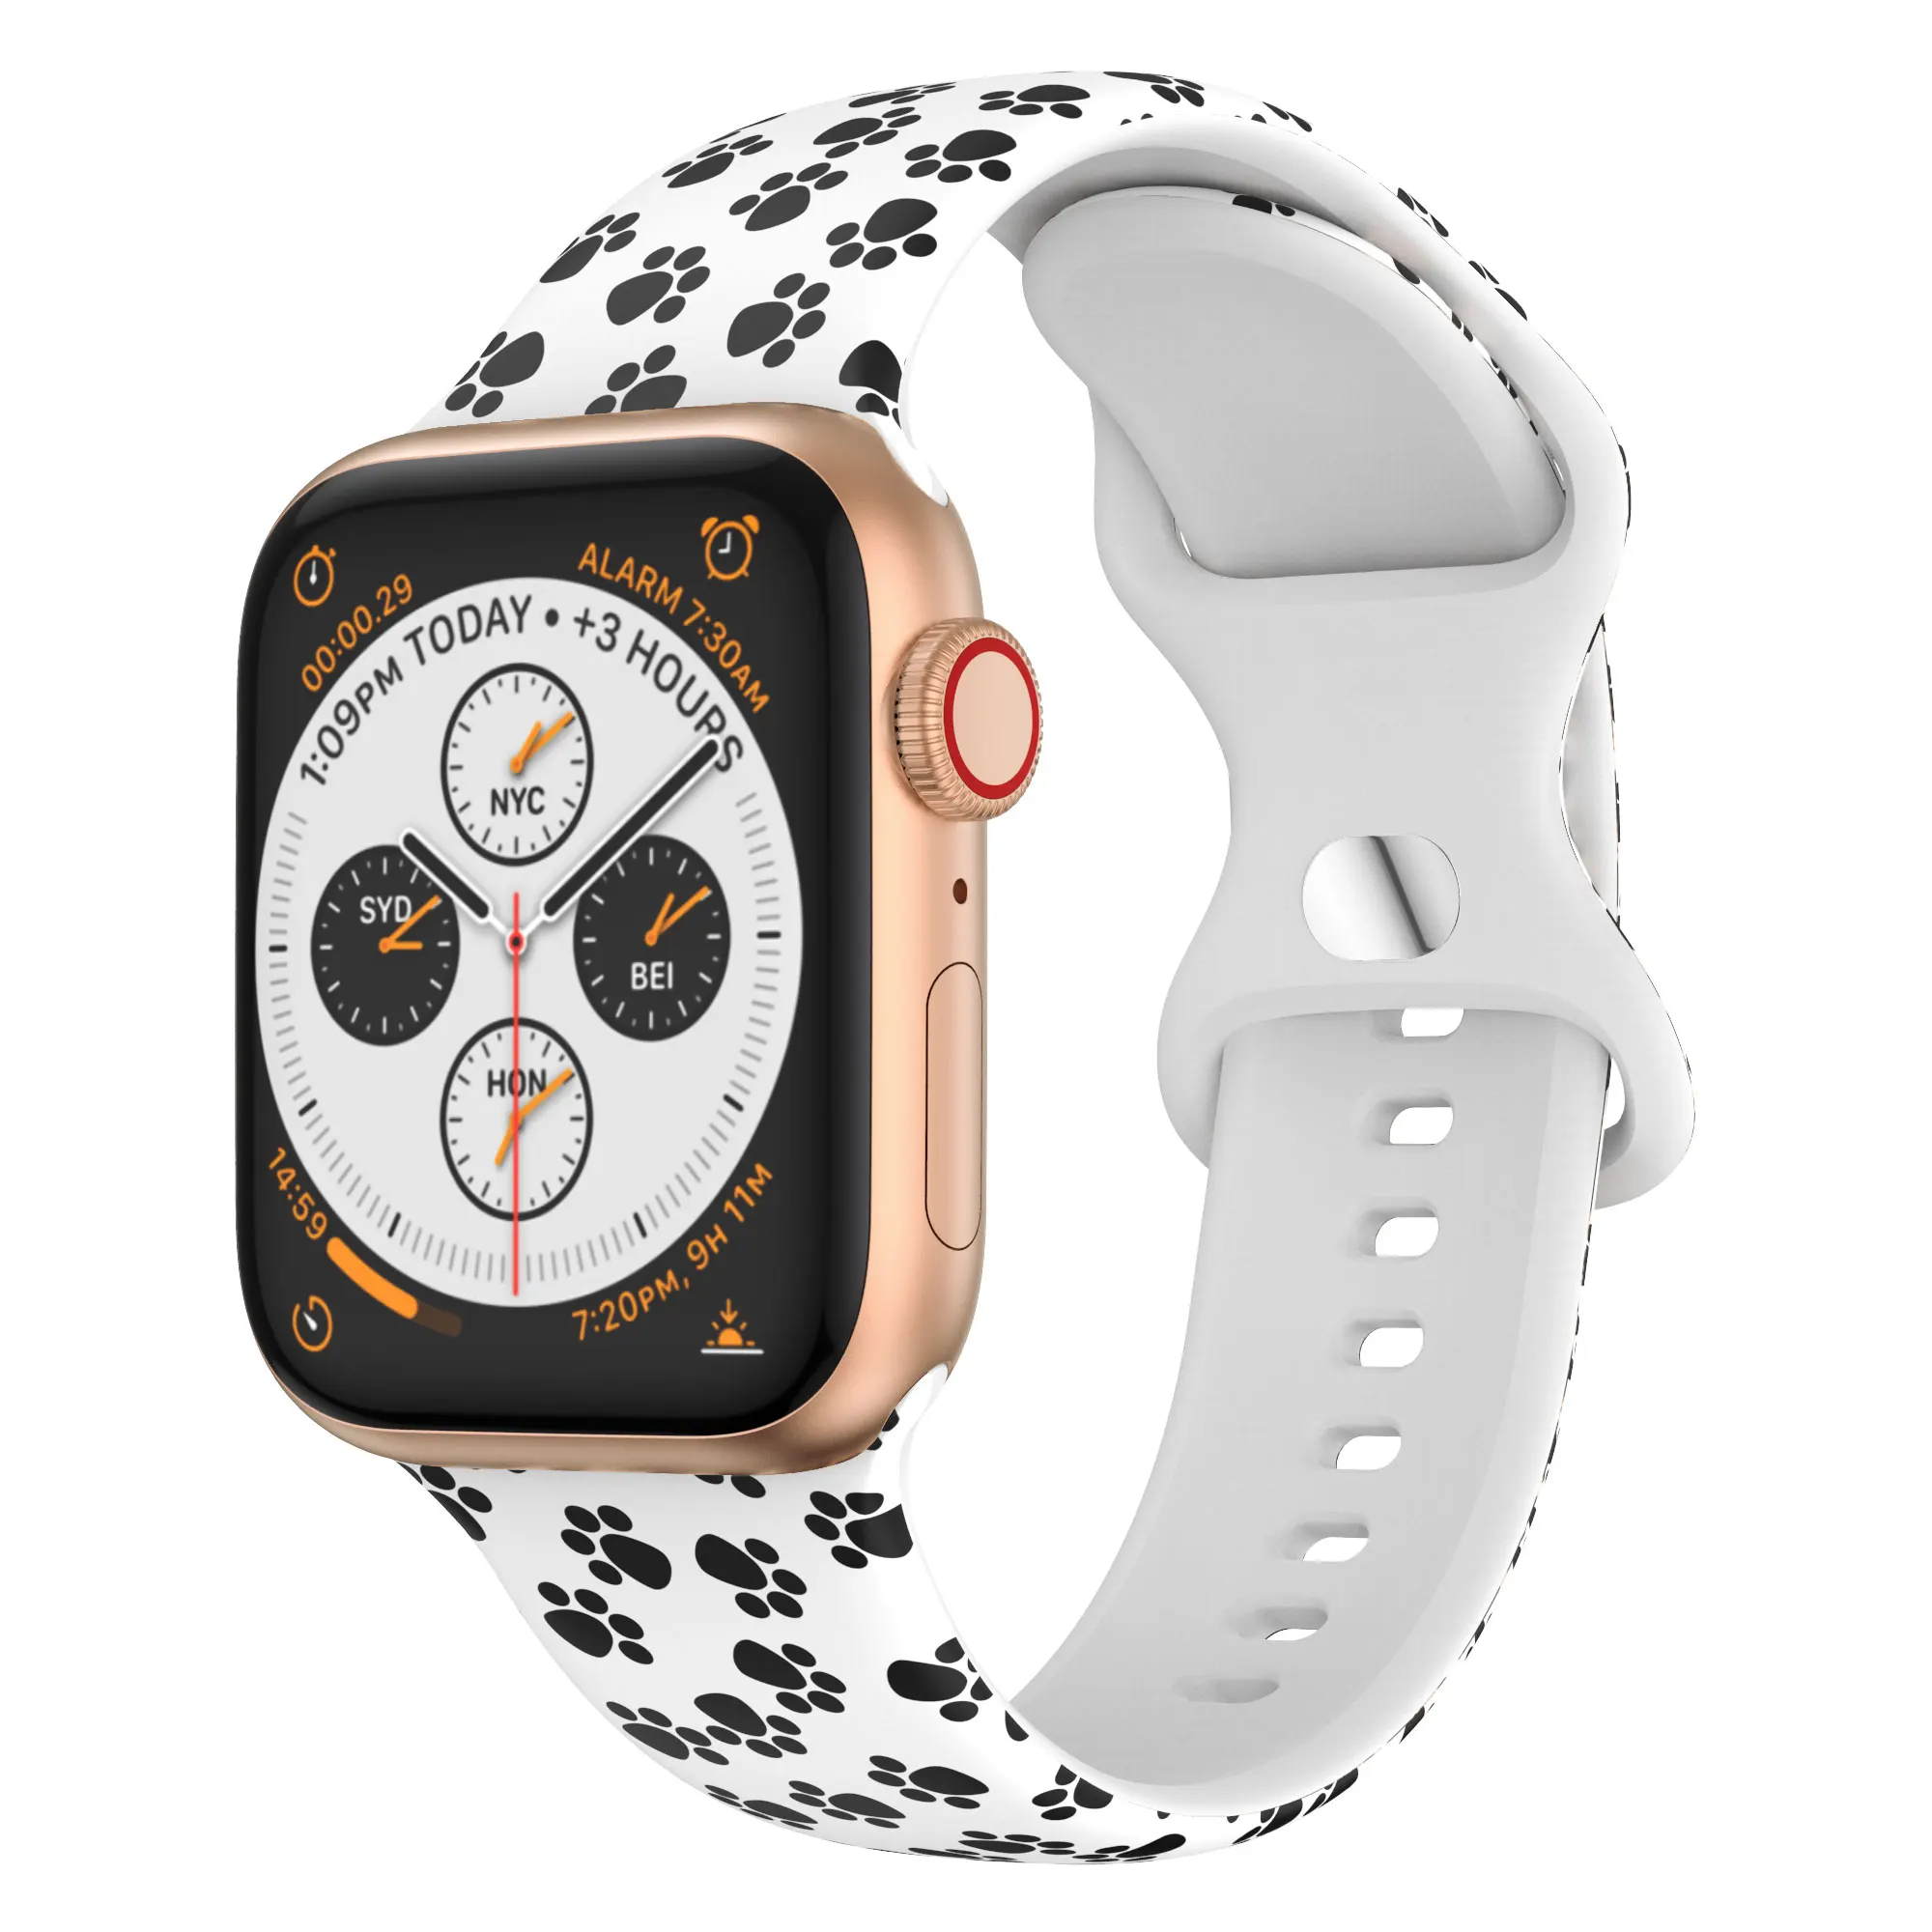 

Eraysun Hot Black Friday Gift Leopard Rubber Strap For Apple i Watch Band Soft Silicone Pattern Printed Luxury Rubber Watch Band